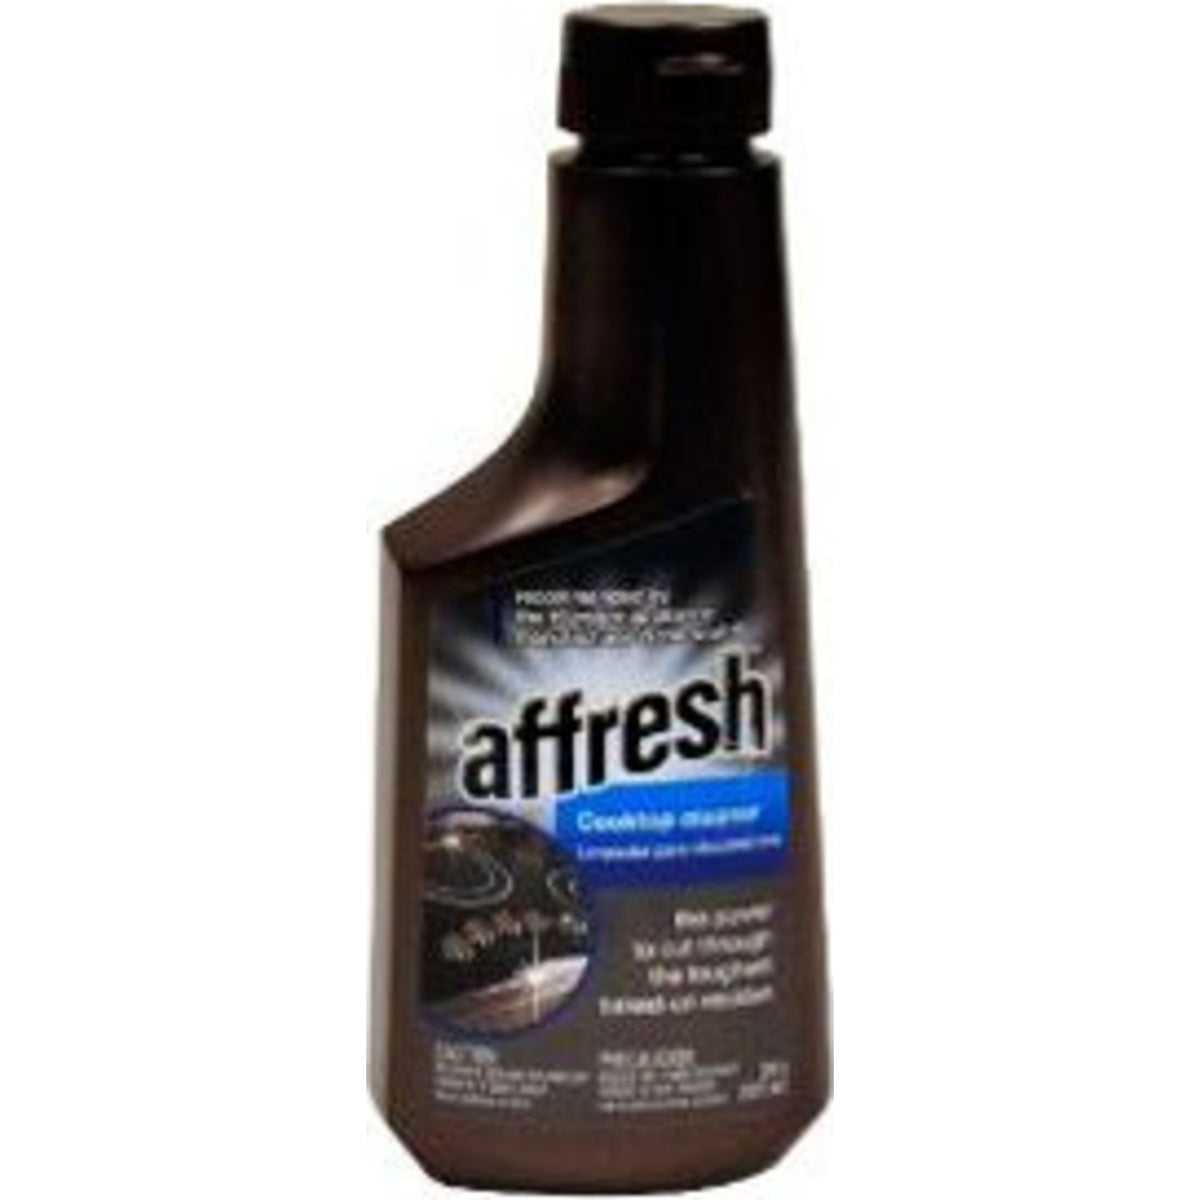 Whirlpool Affresh 8 Oz Cooktop Cleaner - W10355051 - Abt